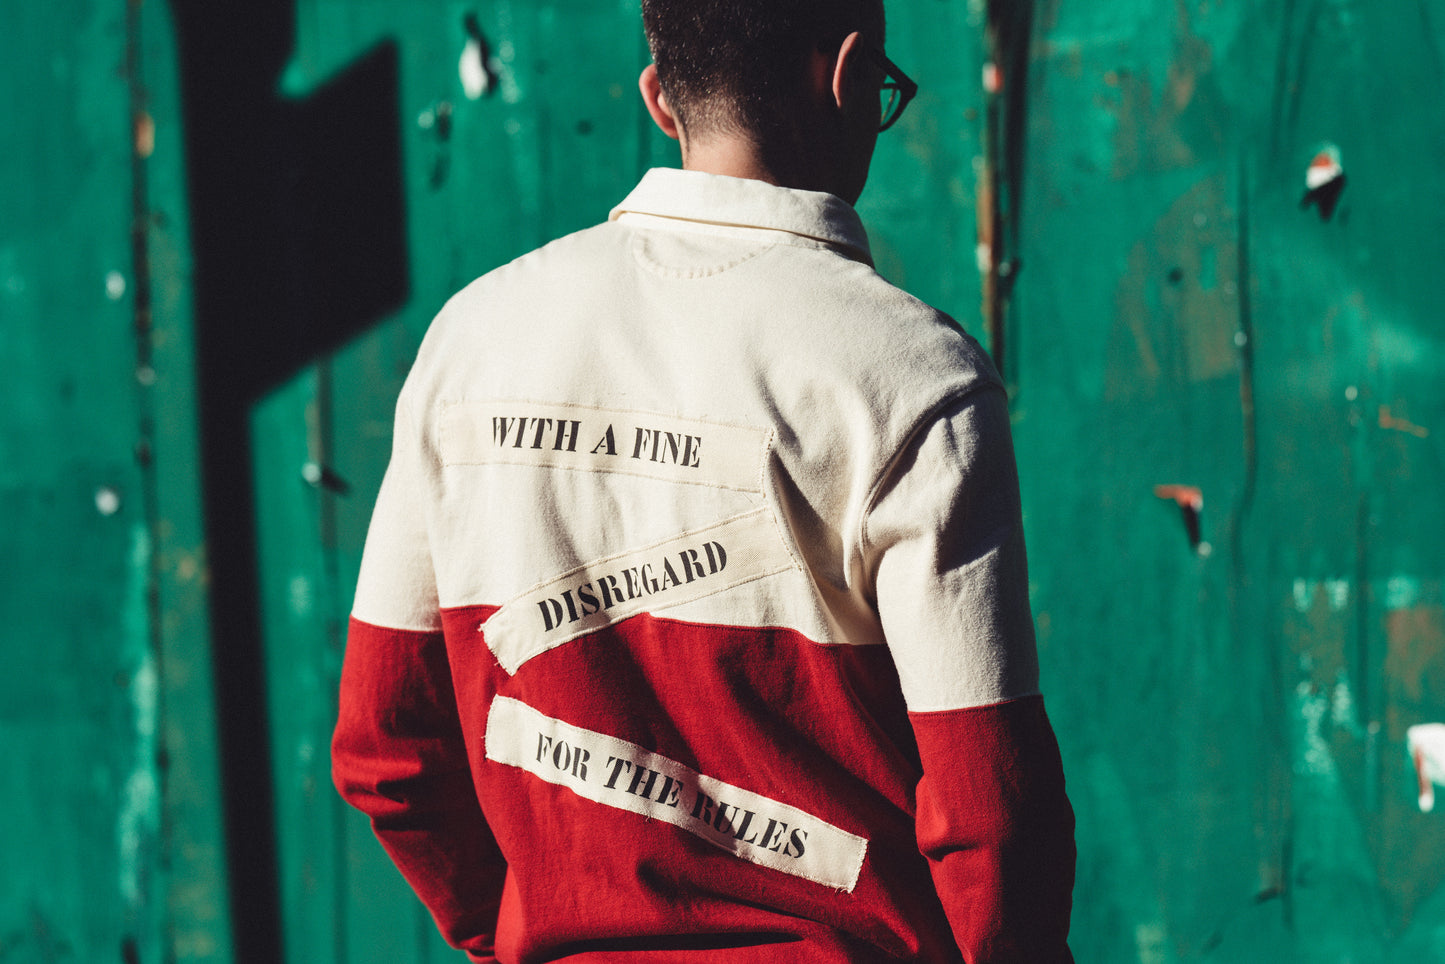 Rowing Blazers X J. Crew Rugby Shirt- Red and White